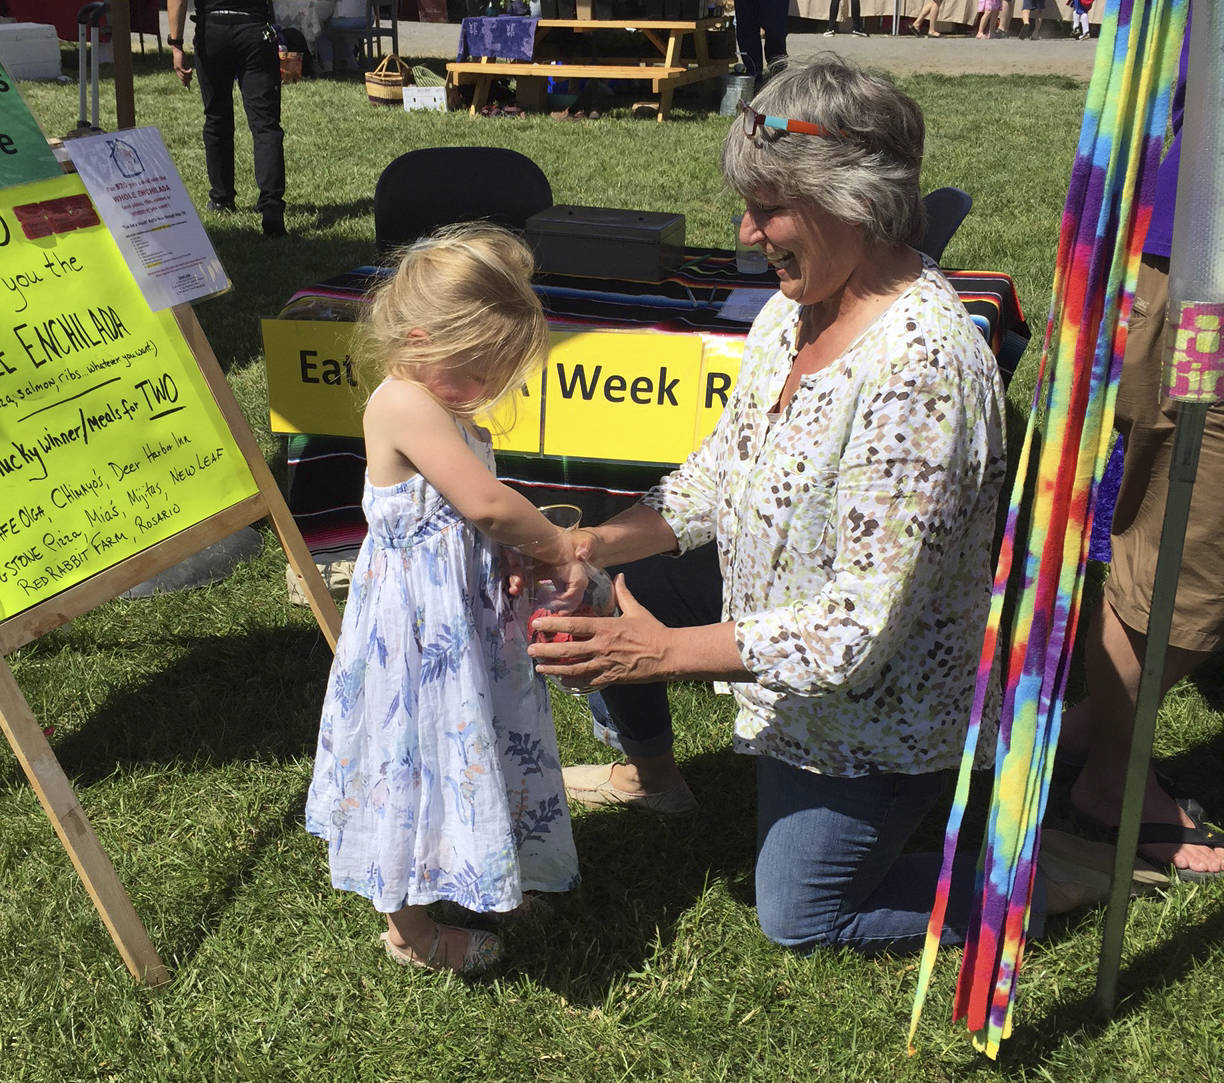 Preschool student Maggie with help from Children’s House director, Susan Anderson, pulls the winning ticket at last year’s drawing.